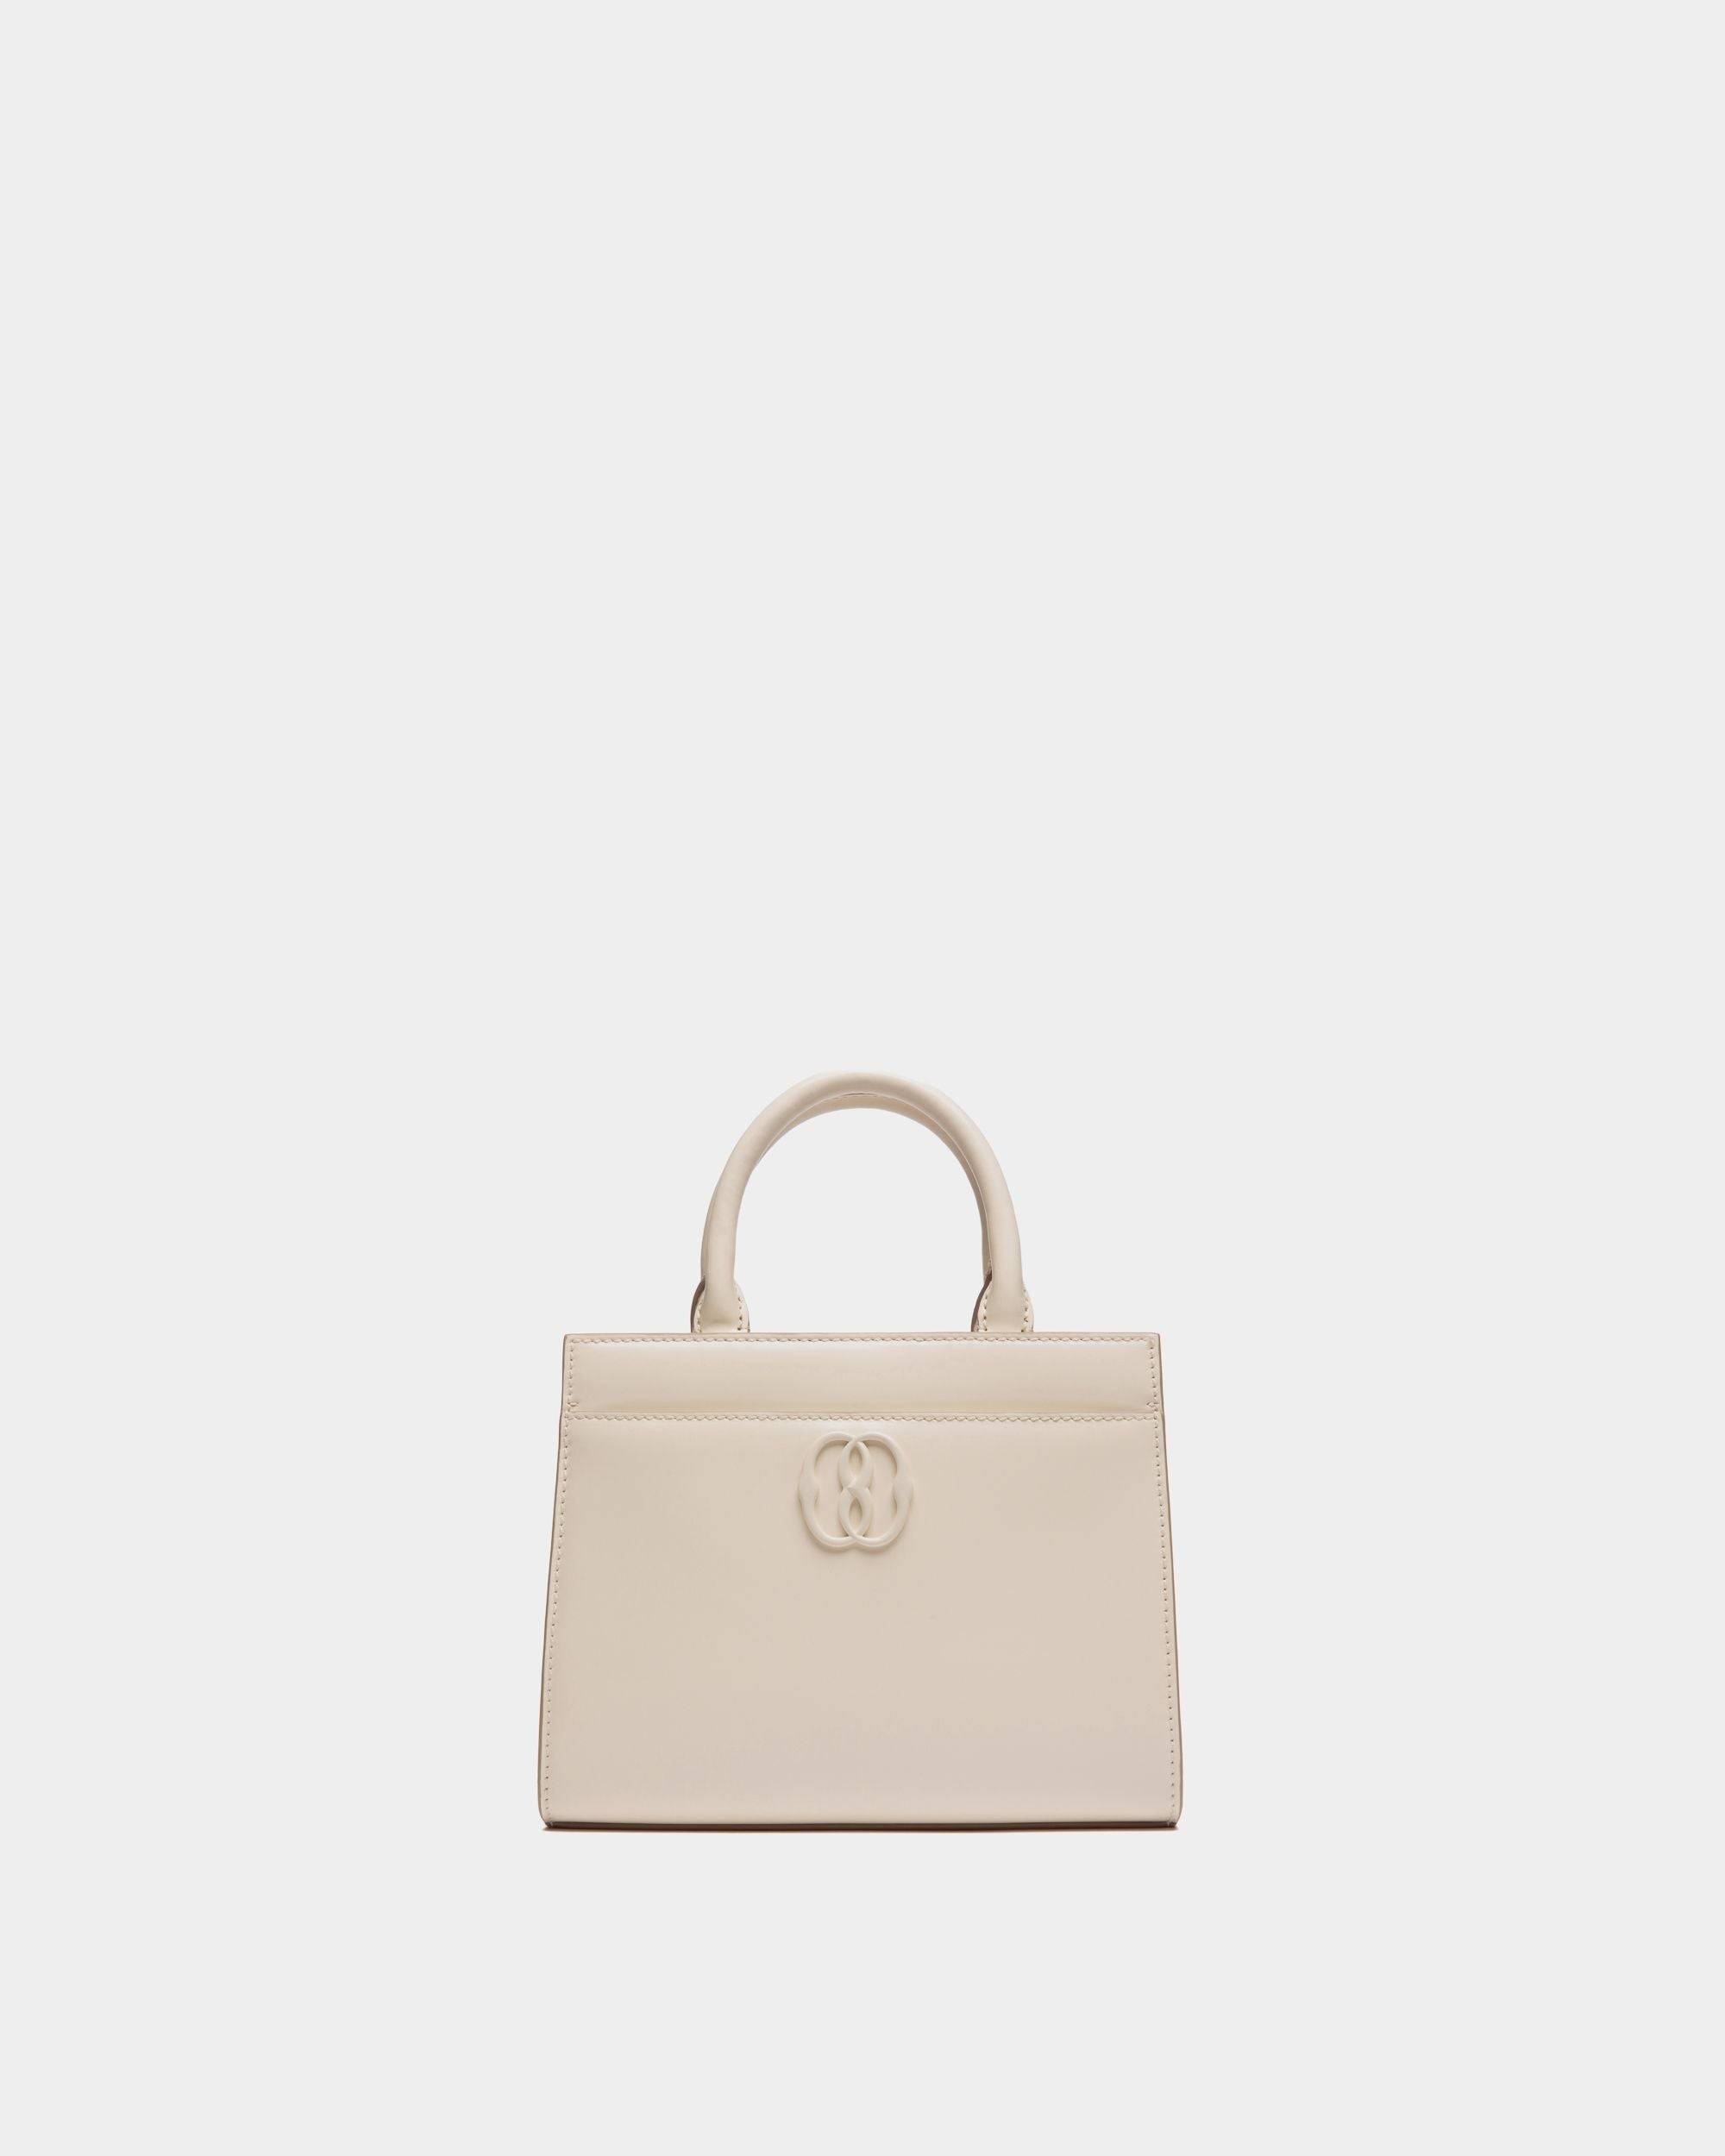 Emblem | Women's Small Tote Bag in White Brushed Leather | Bally | Still Life Front